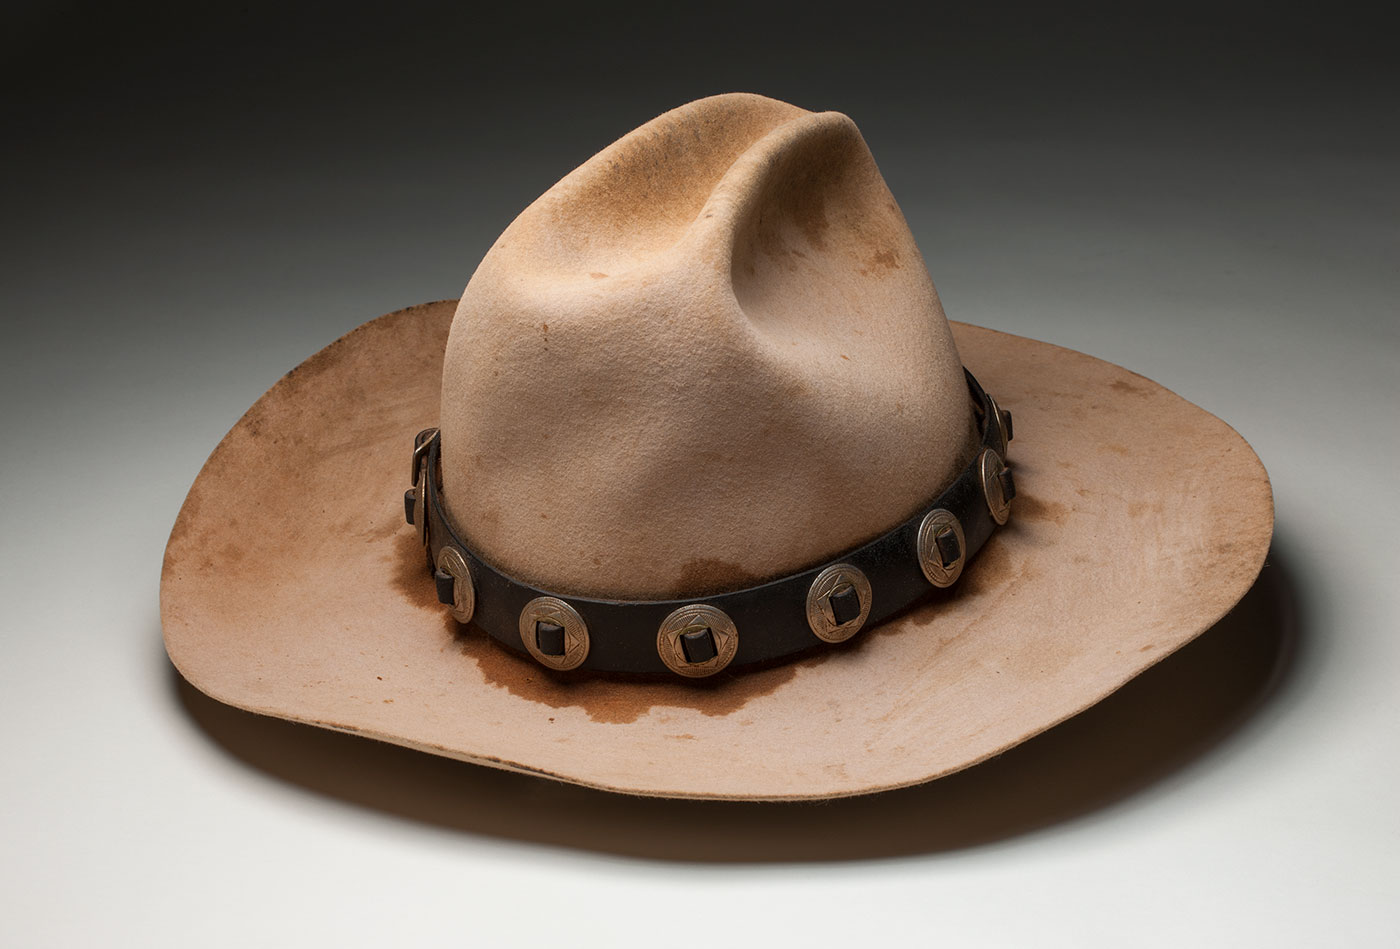 A well-worn light tan coloured hat with a darker leather band, studded with metal.